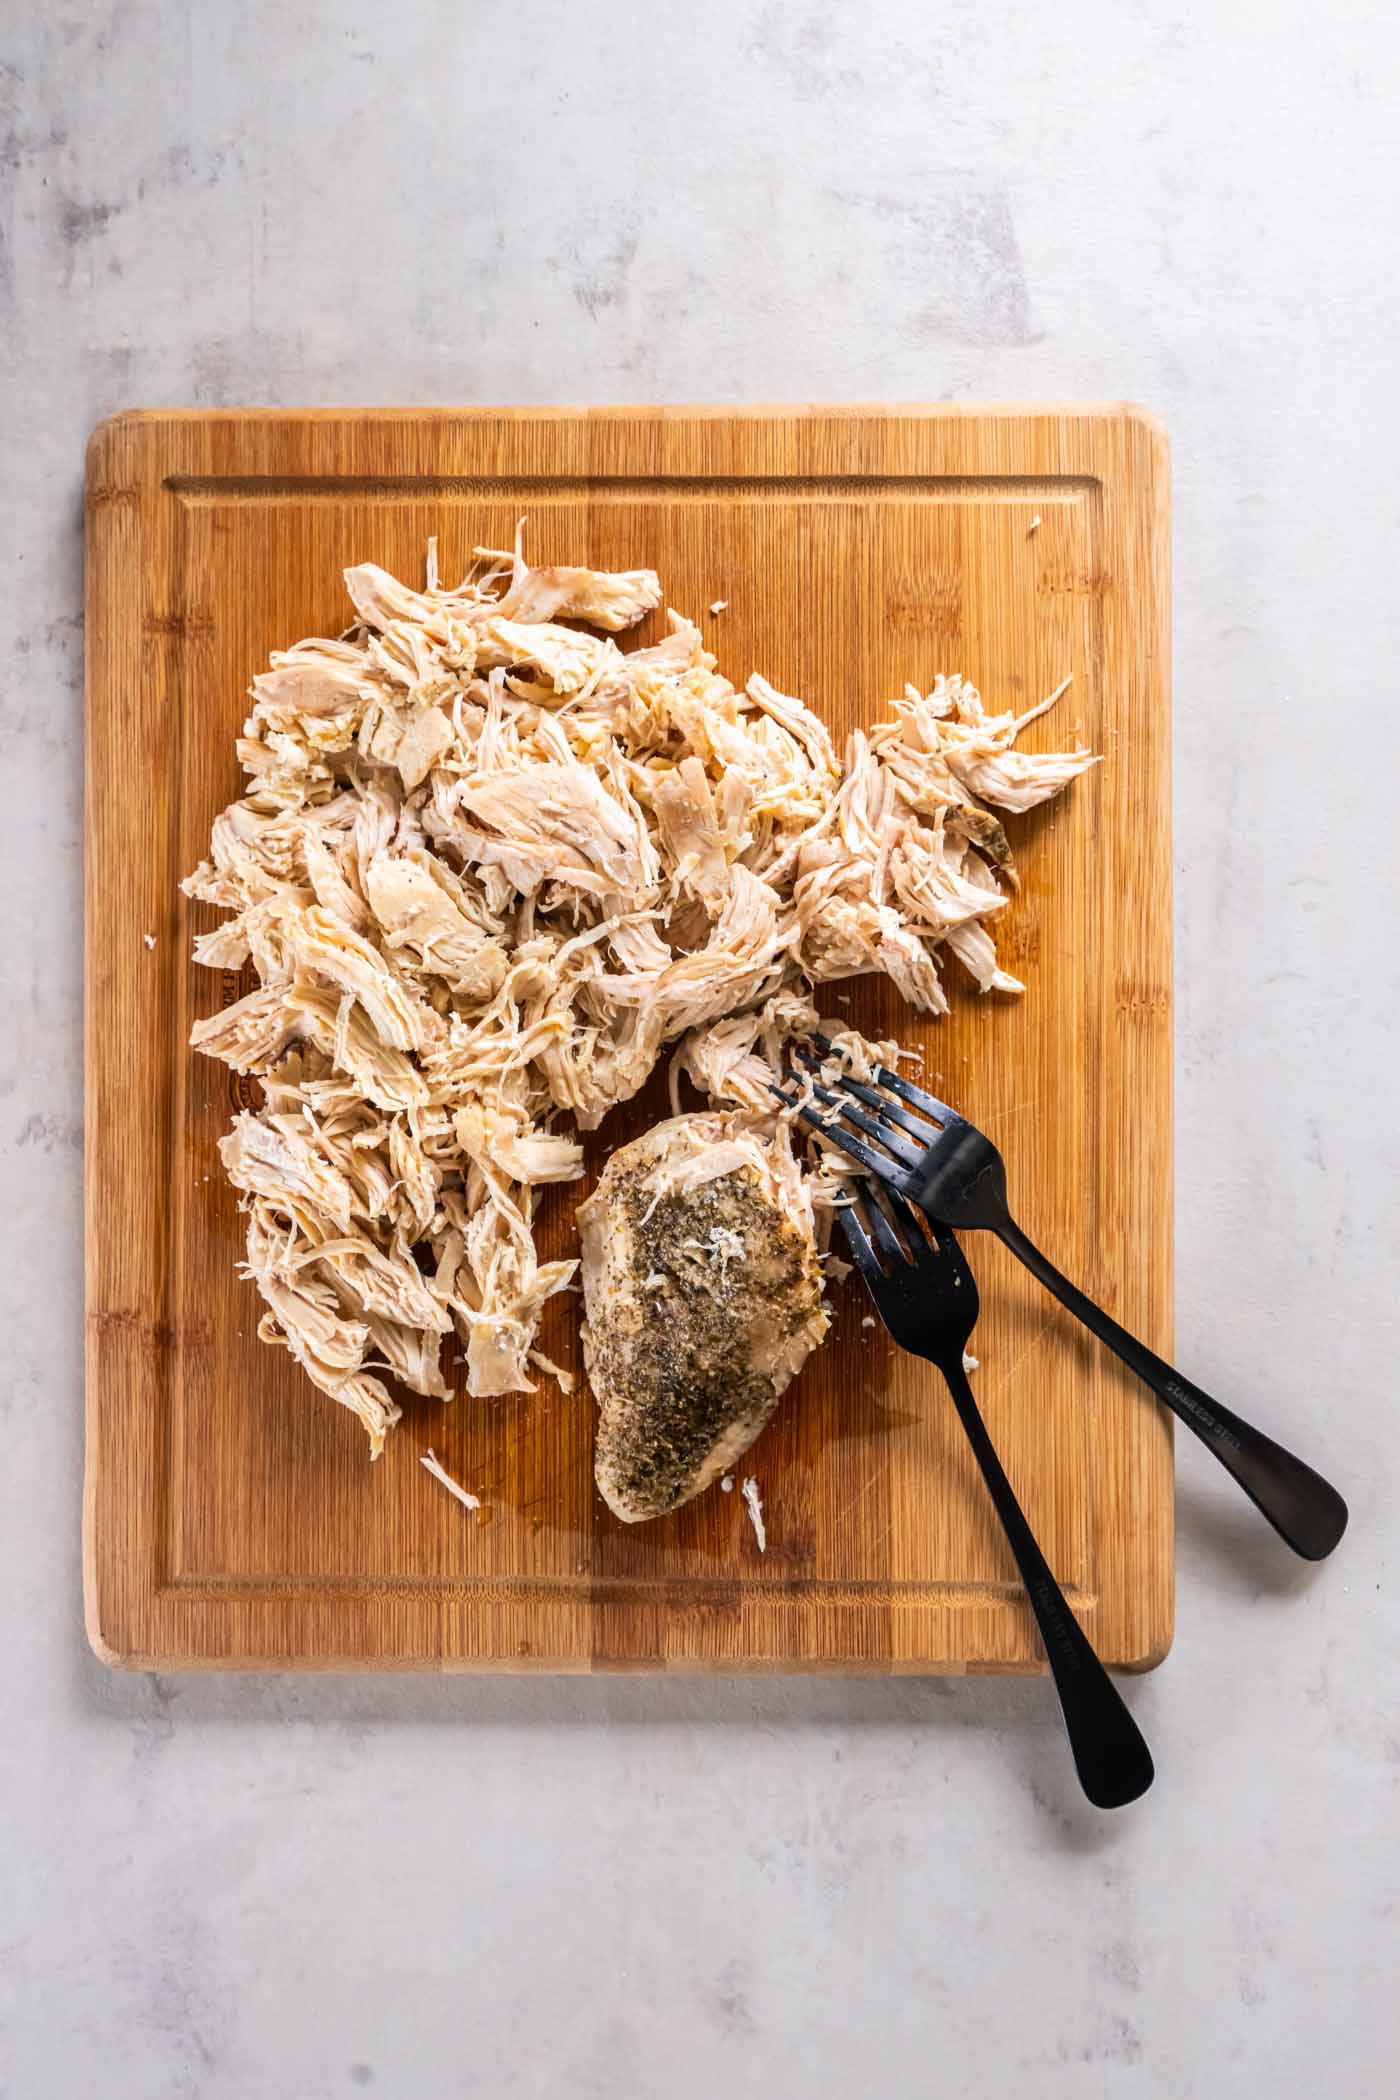 Shredding chicken breasts with two forks on a cutting board.